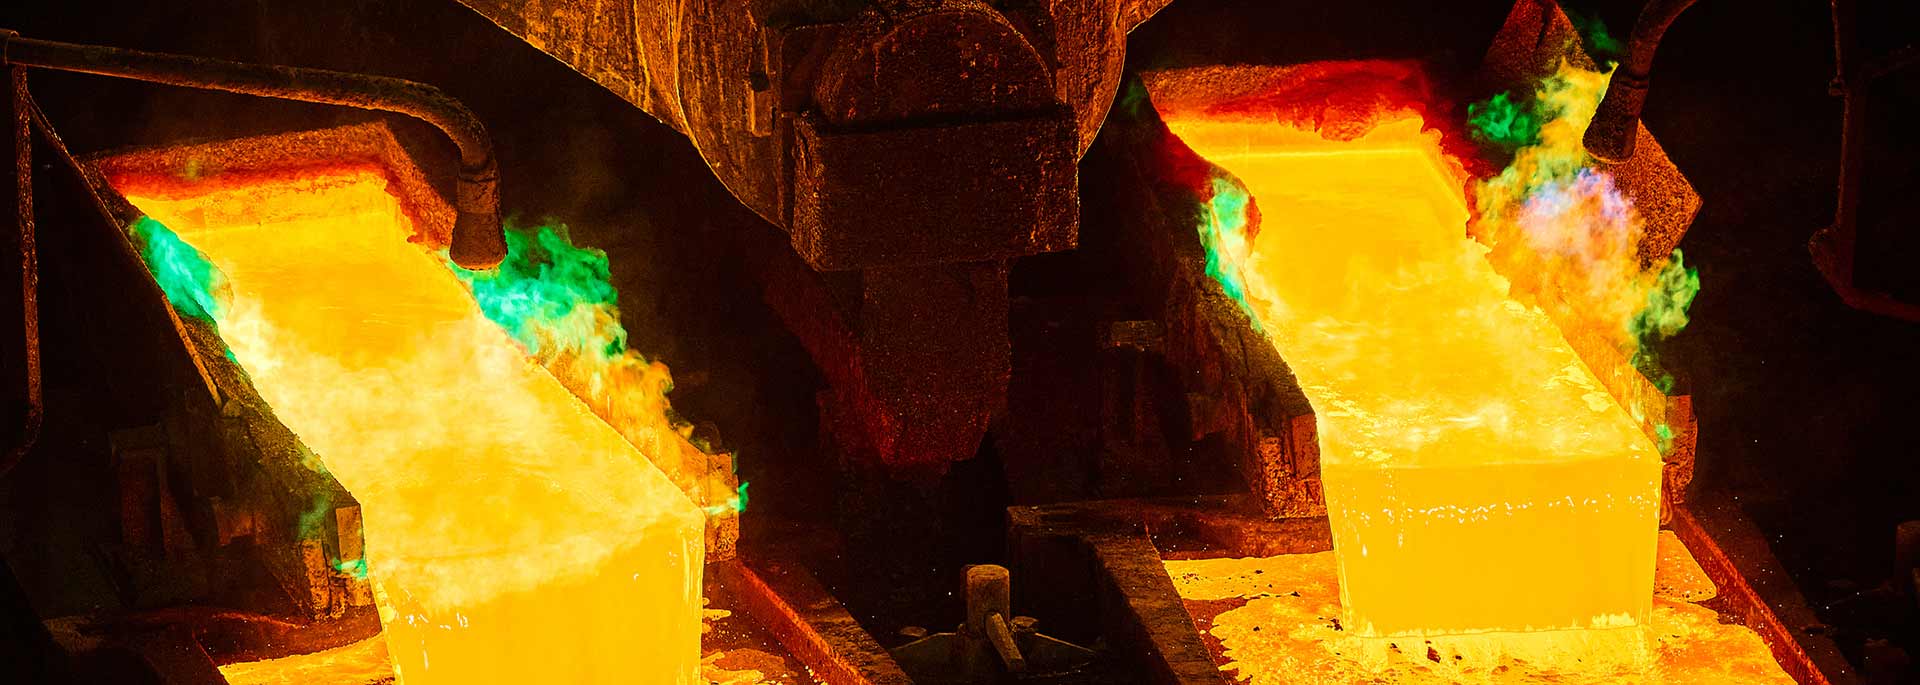 Two buckets of bright molten steel pouring into containers.